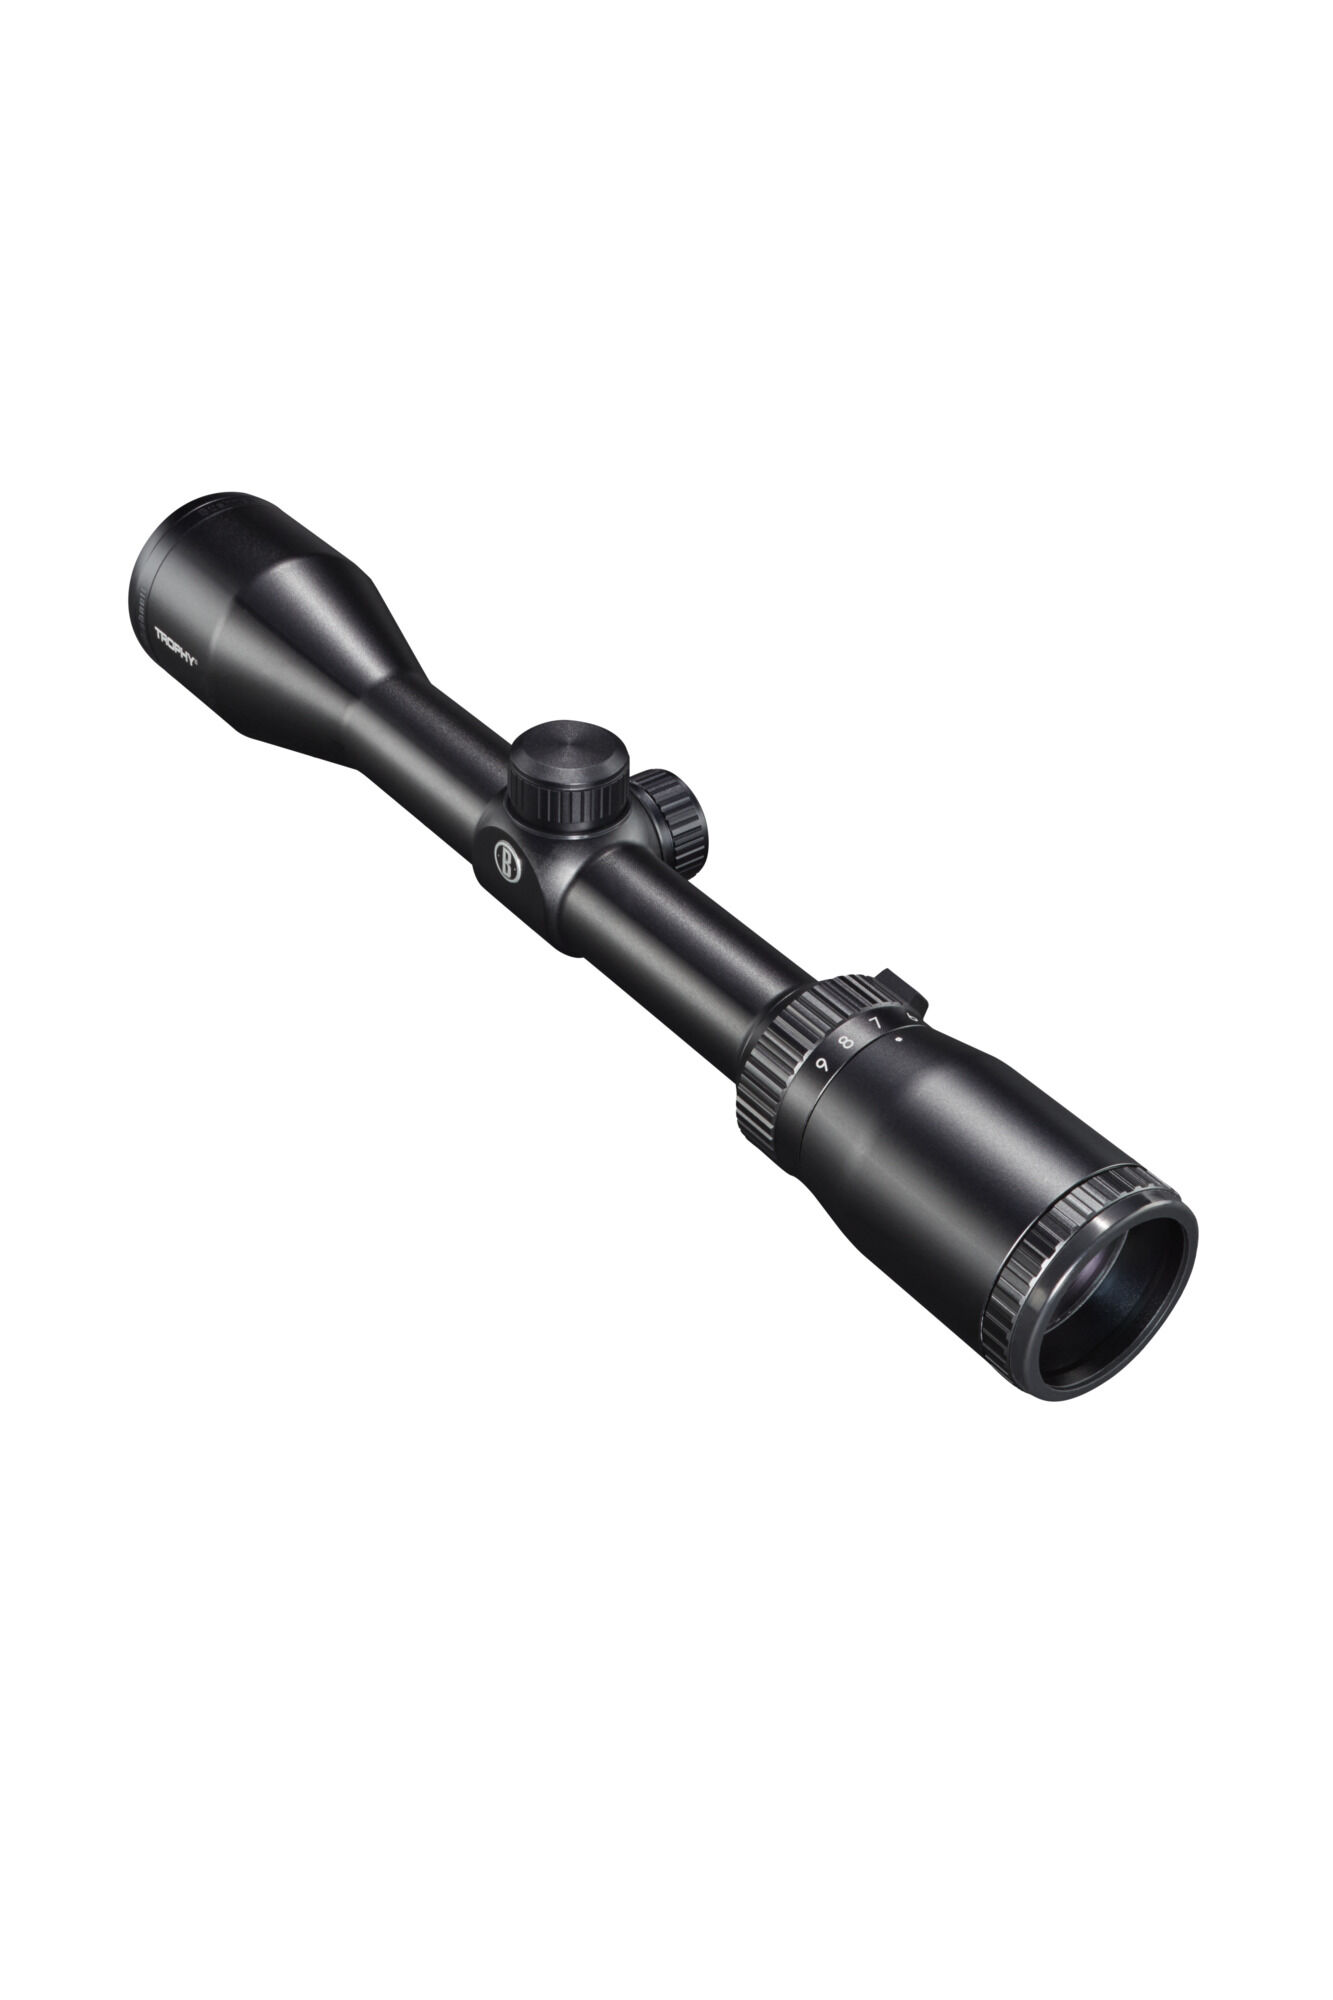 Buy Trophy® Riflescope and More | Bushnell